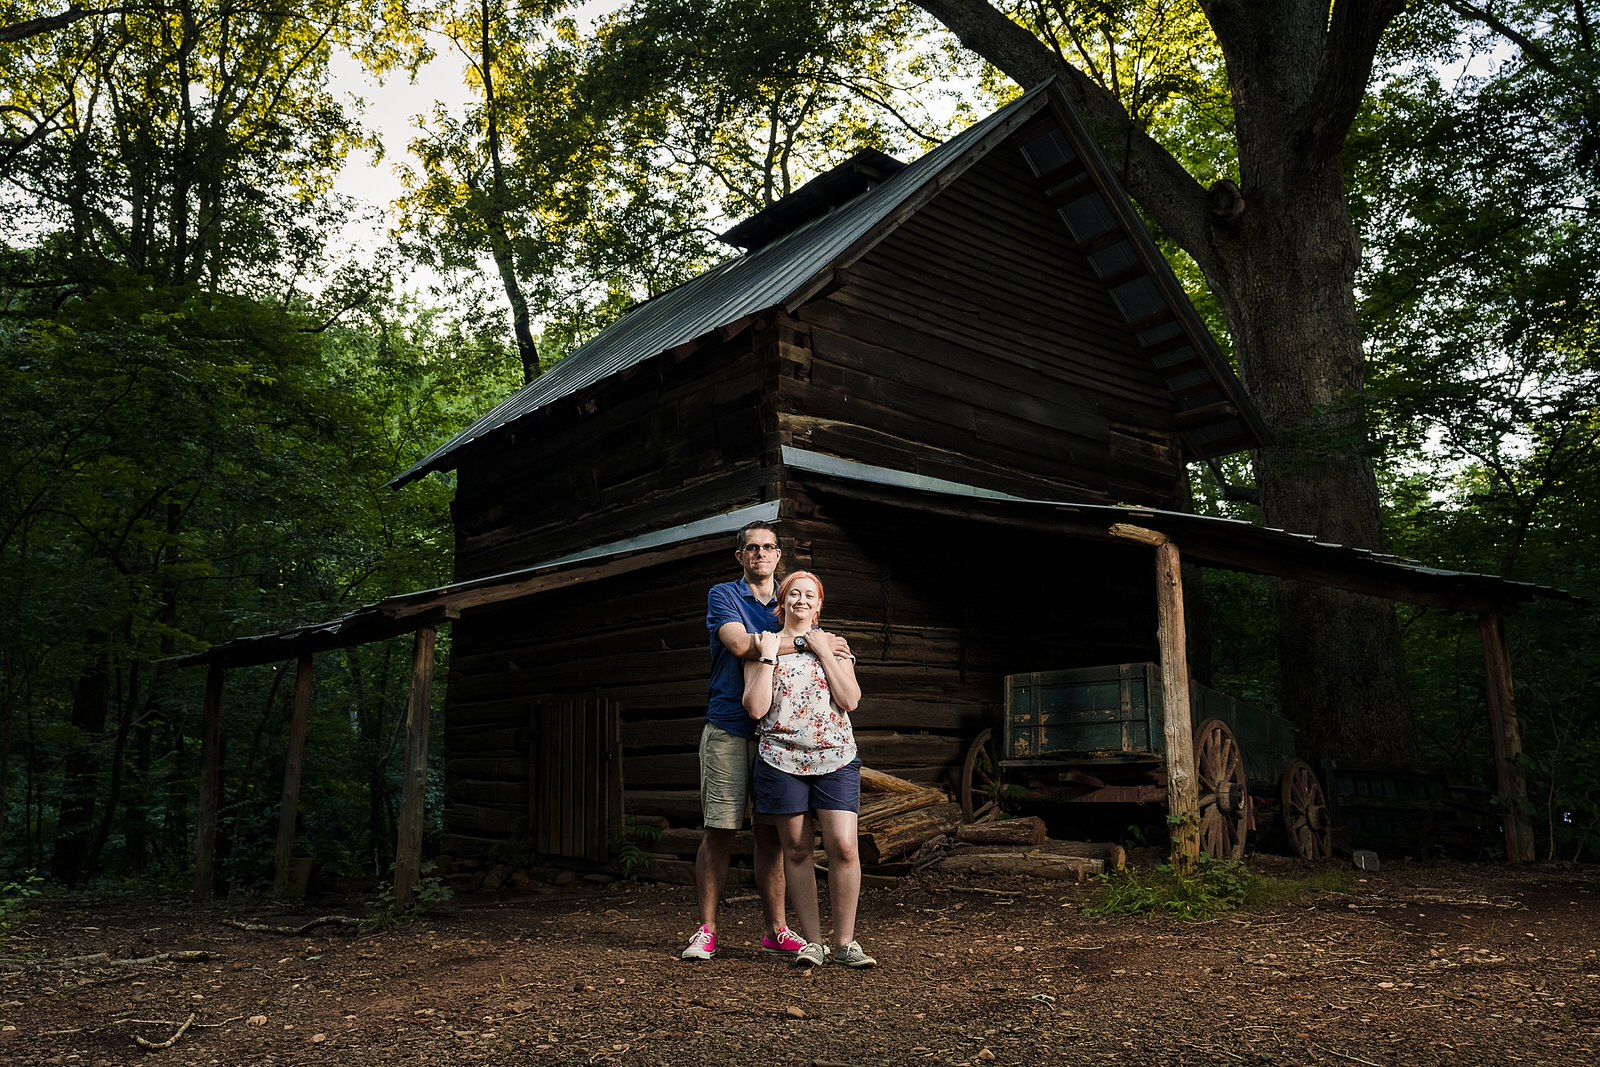 An engaged couple stands in front of one of the buildings at the West Point on the Eno park